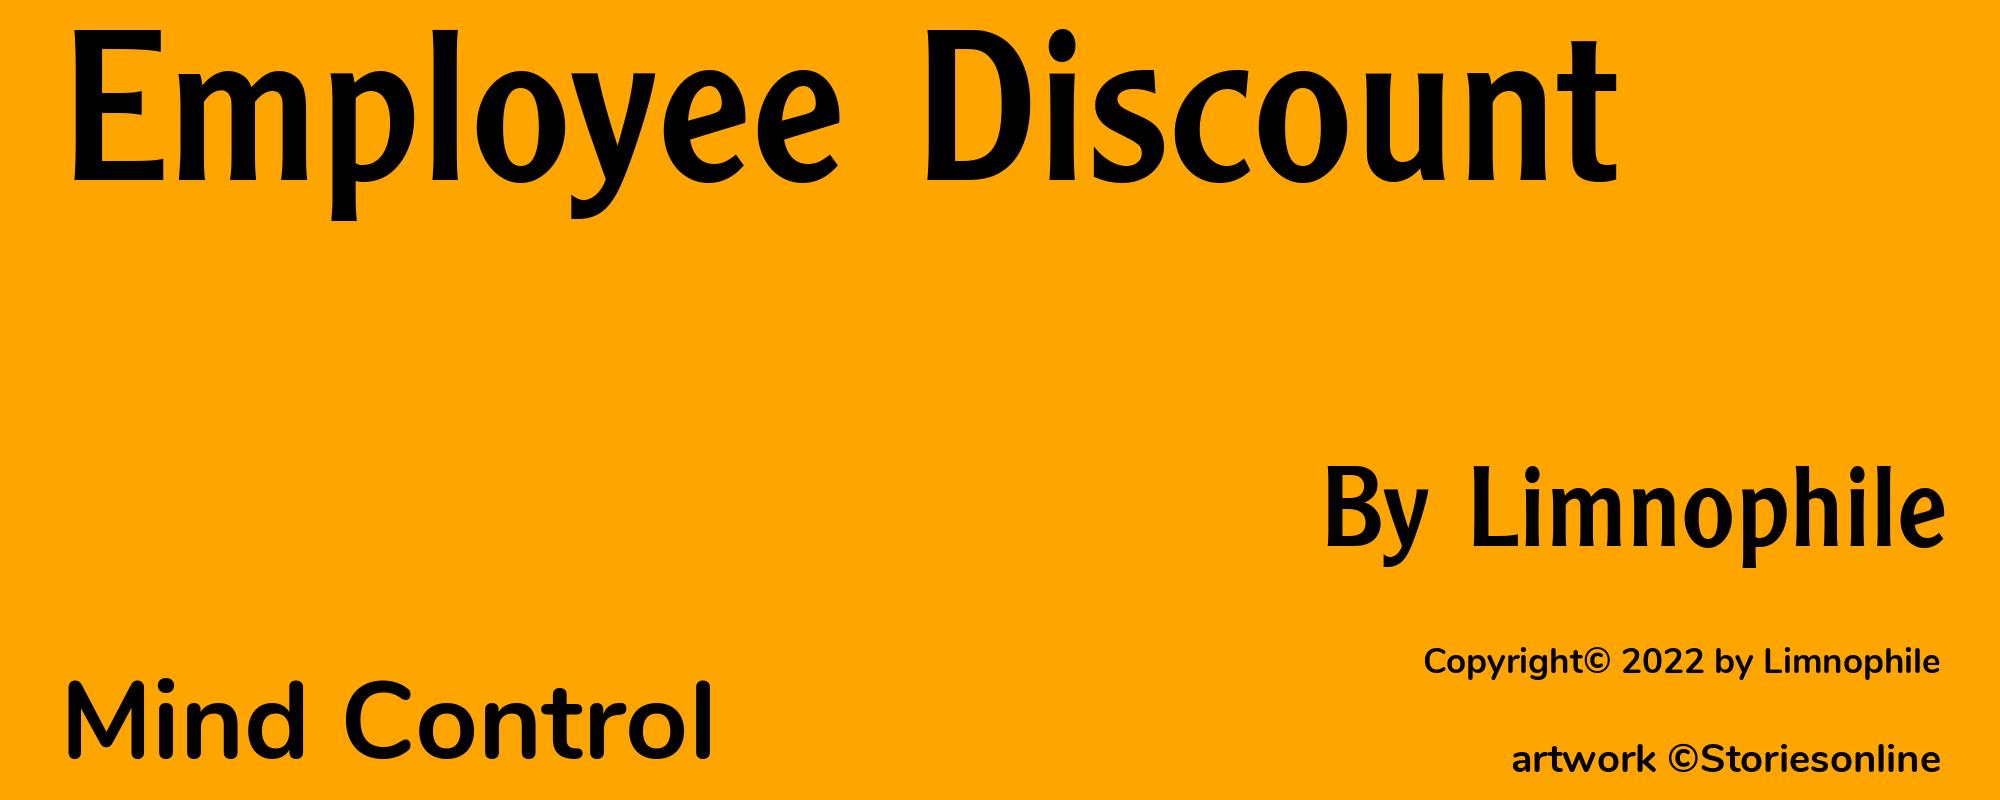 Employee Discount - Cover